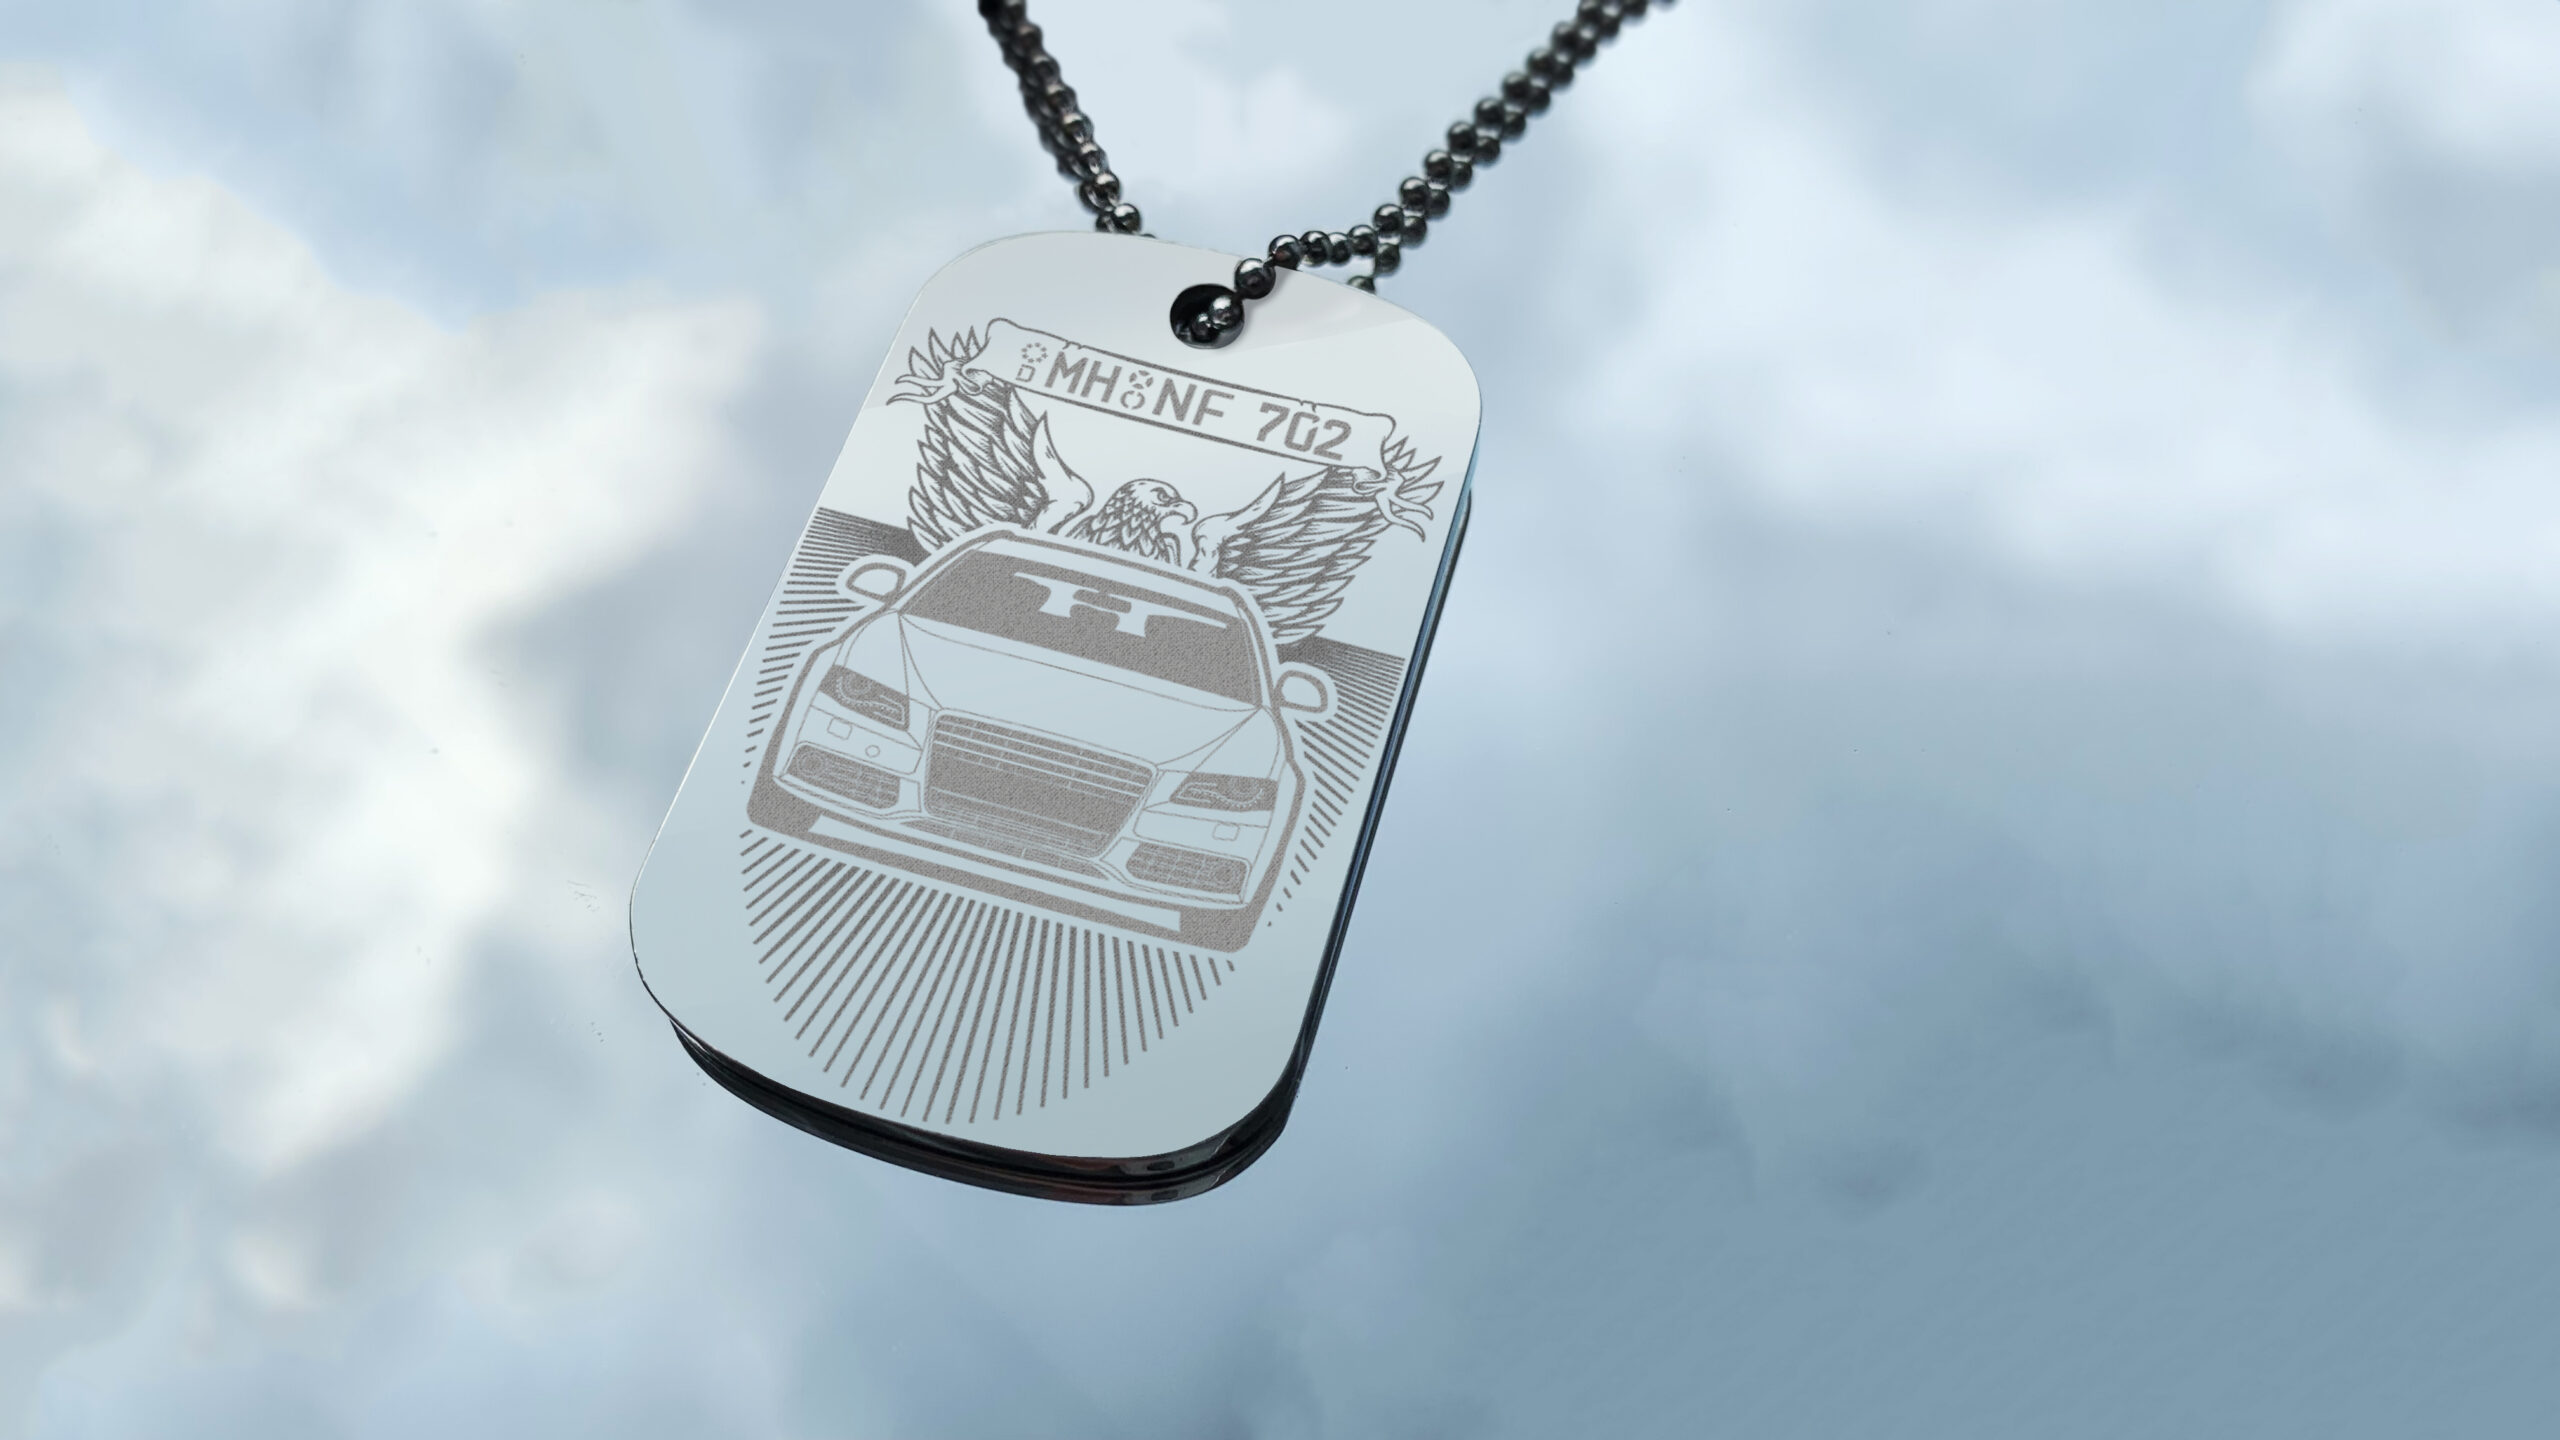 gallery-photo-dog-tag-engraving-2